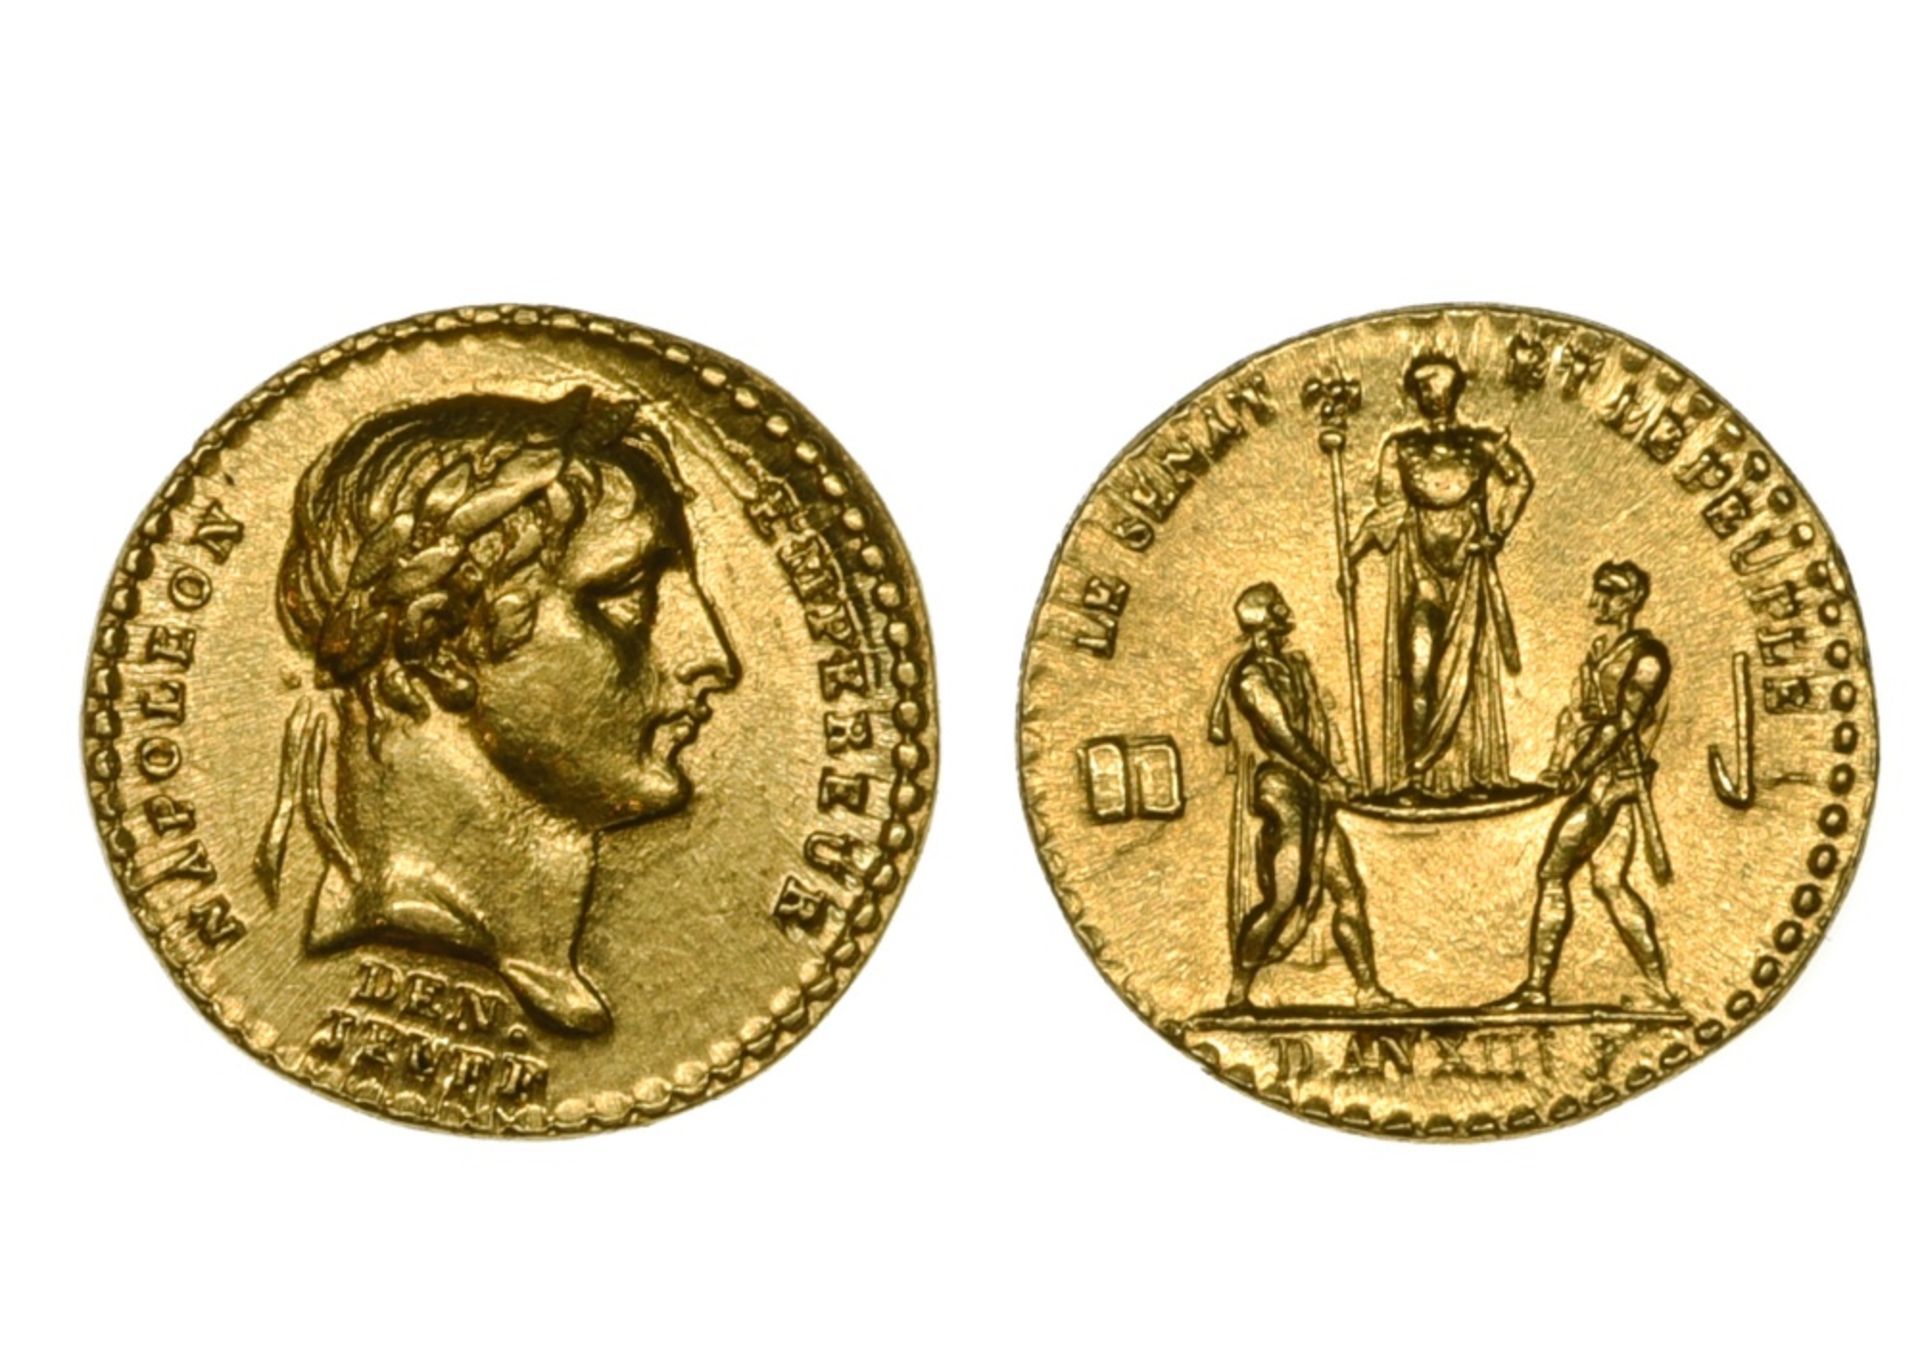 France Napoleon I (1804-1814), small coronation medal, 1.90g, 13mm, in gold, AN XIII, by Denon and